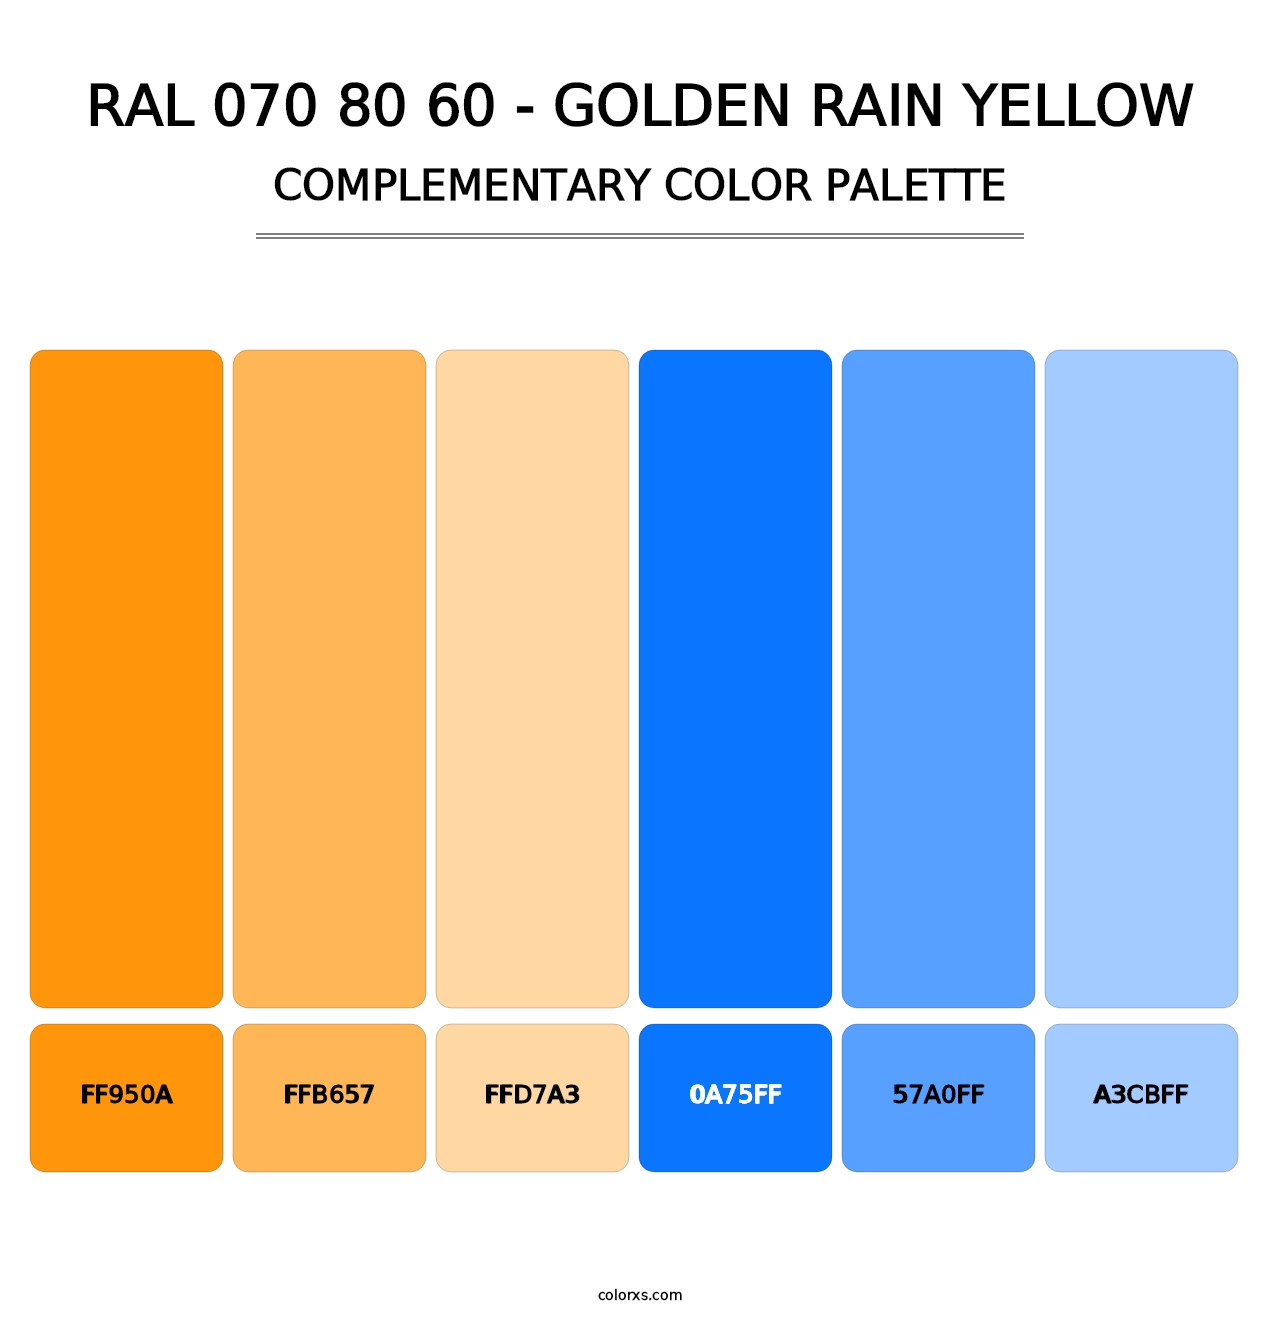 RAL 070 80 60 - Golden Rain Yellow - Complementary Color Palette